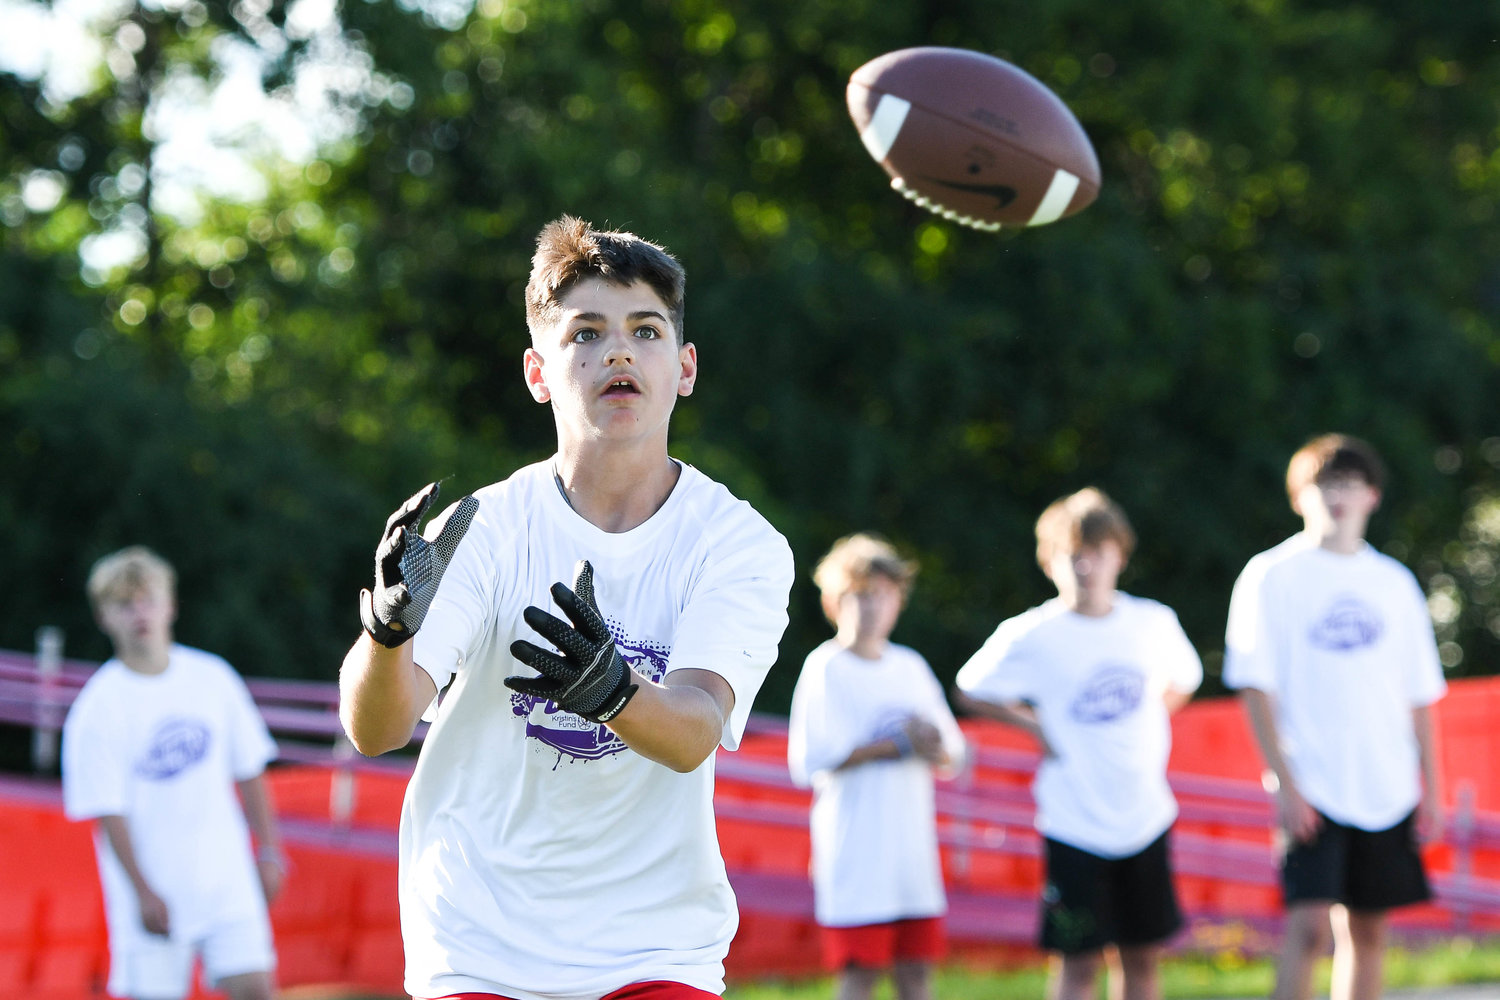 EYES ON THE BALL — Taegen Johnson, of Dolgeville, prepares to catch a ball during drills at the fifth annual “A Call to Men” football camp on Tuesday night at Charles A. Gaetano Stadium at Utica University. Celebrity guests coaches included Minnesota Vikings tight ends coach Brian Angelichio, a 1991 Ilion High School graduate, and former Syracuse football star Don McPherson.